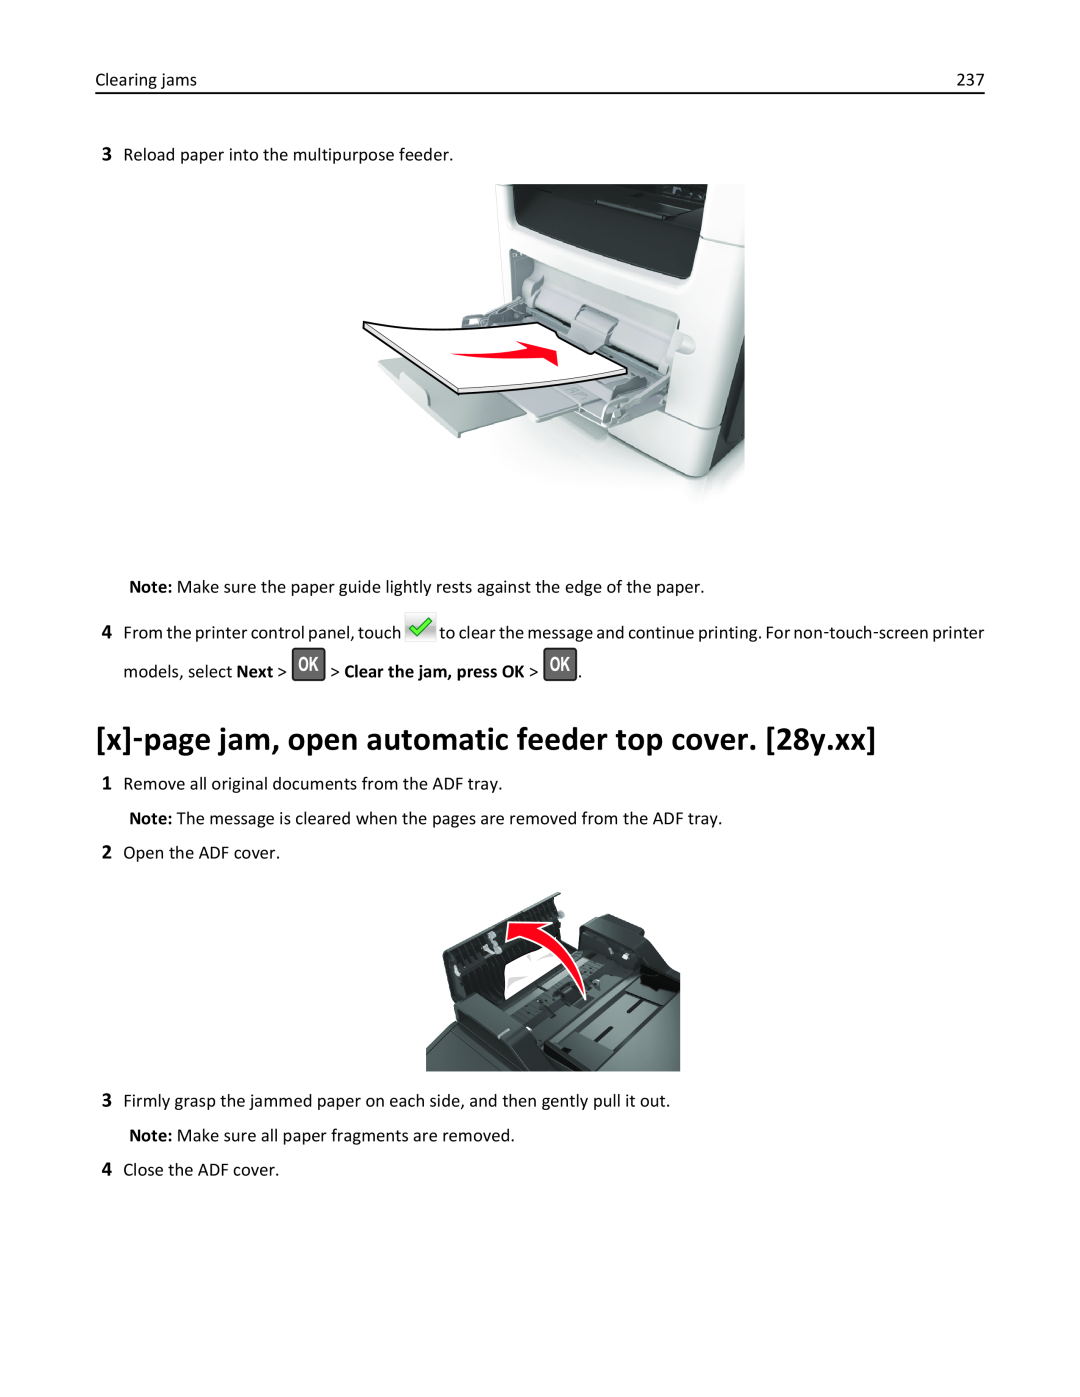 Lexmark MX410DE, 470, 670 x‑page jam, open automatic feeder top cover. 28y.xx, models, select Next Clear the jam, press OK 